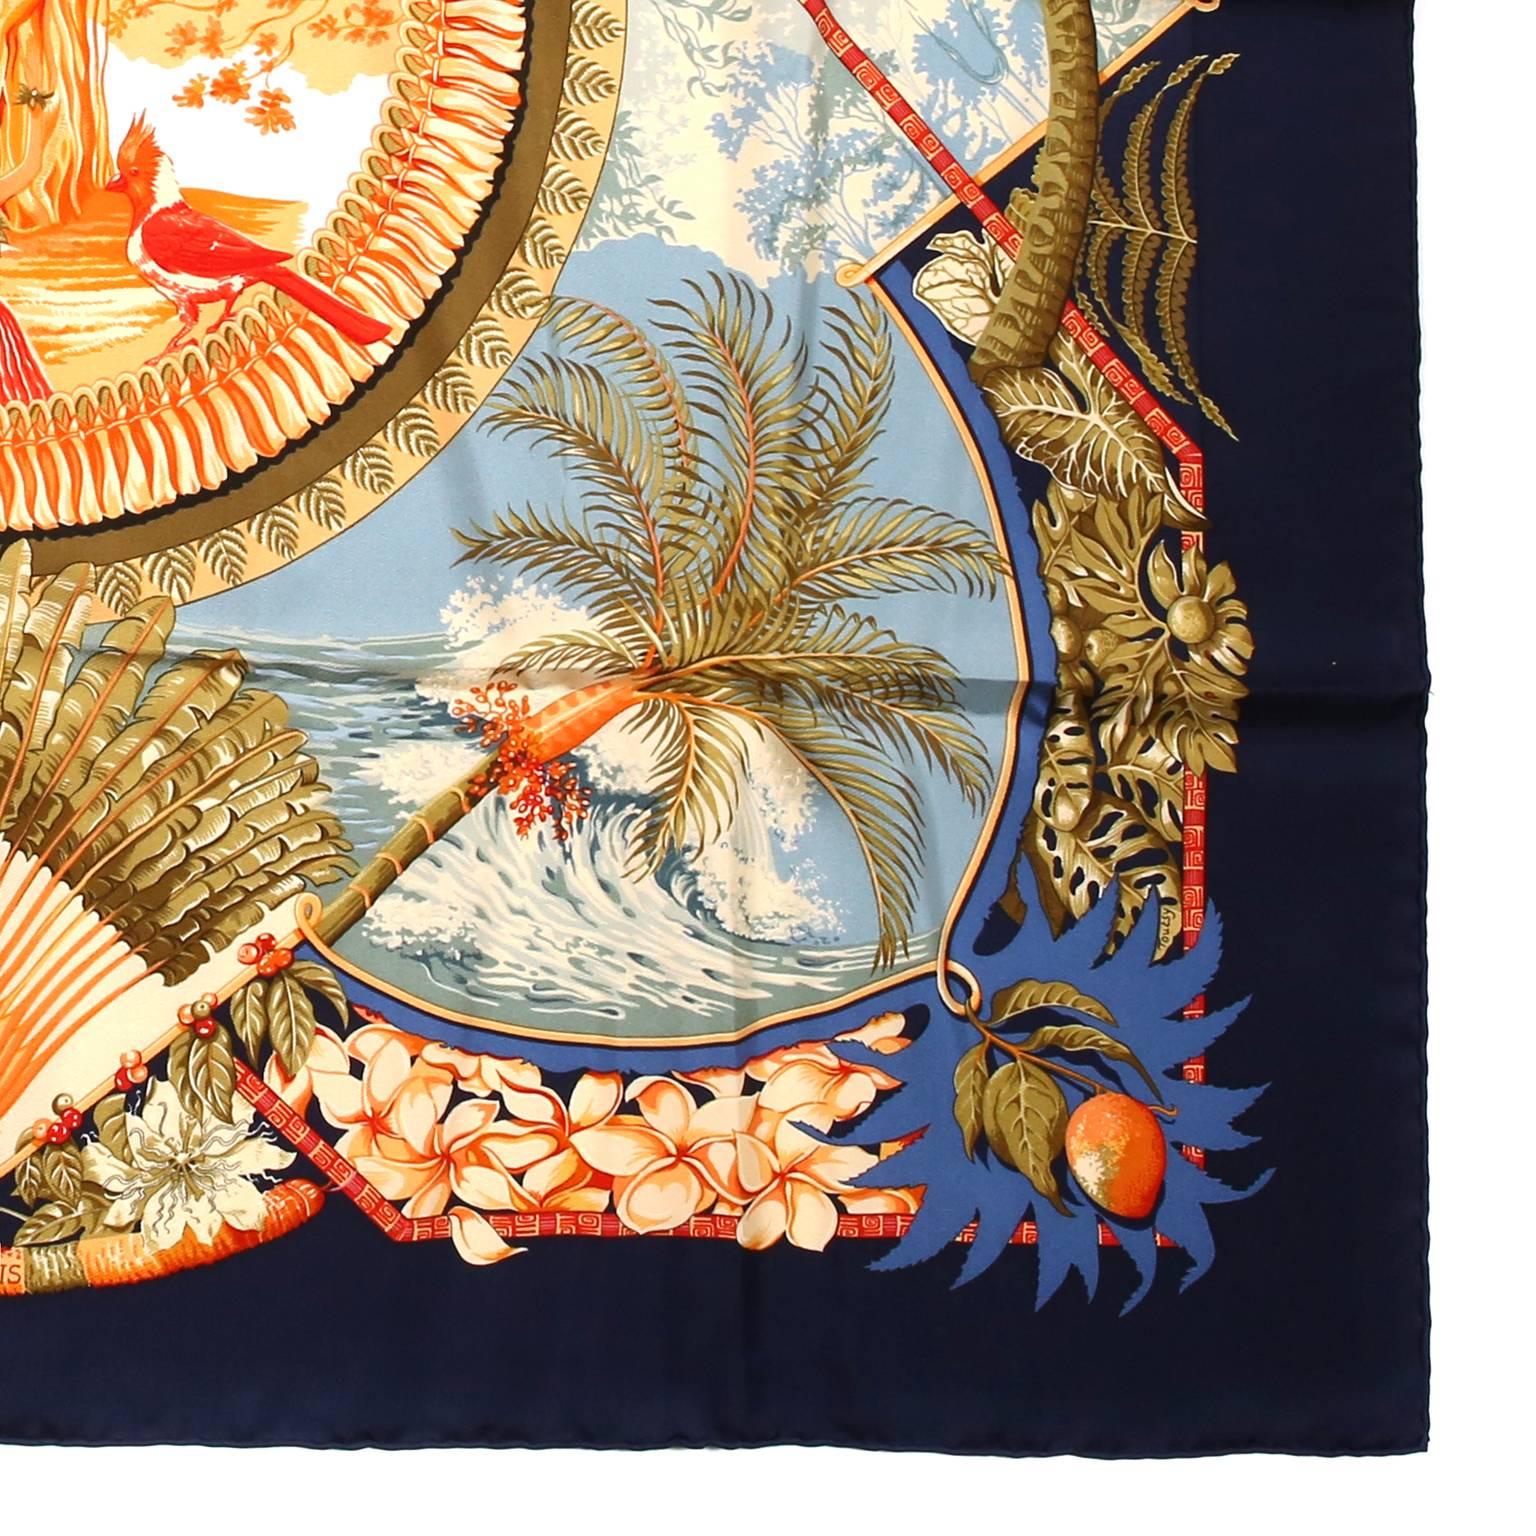 This authentic Hermès Blue and Orange Aloha 90 cm Silk Scarf is new with the original box. Originally designed by Bourthomieux in 2000, the print features a navy blue border with vibrant orange center design. Tropical theme with palm trees, exotic